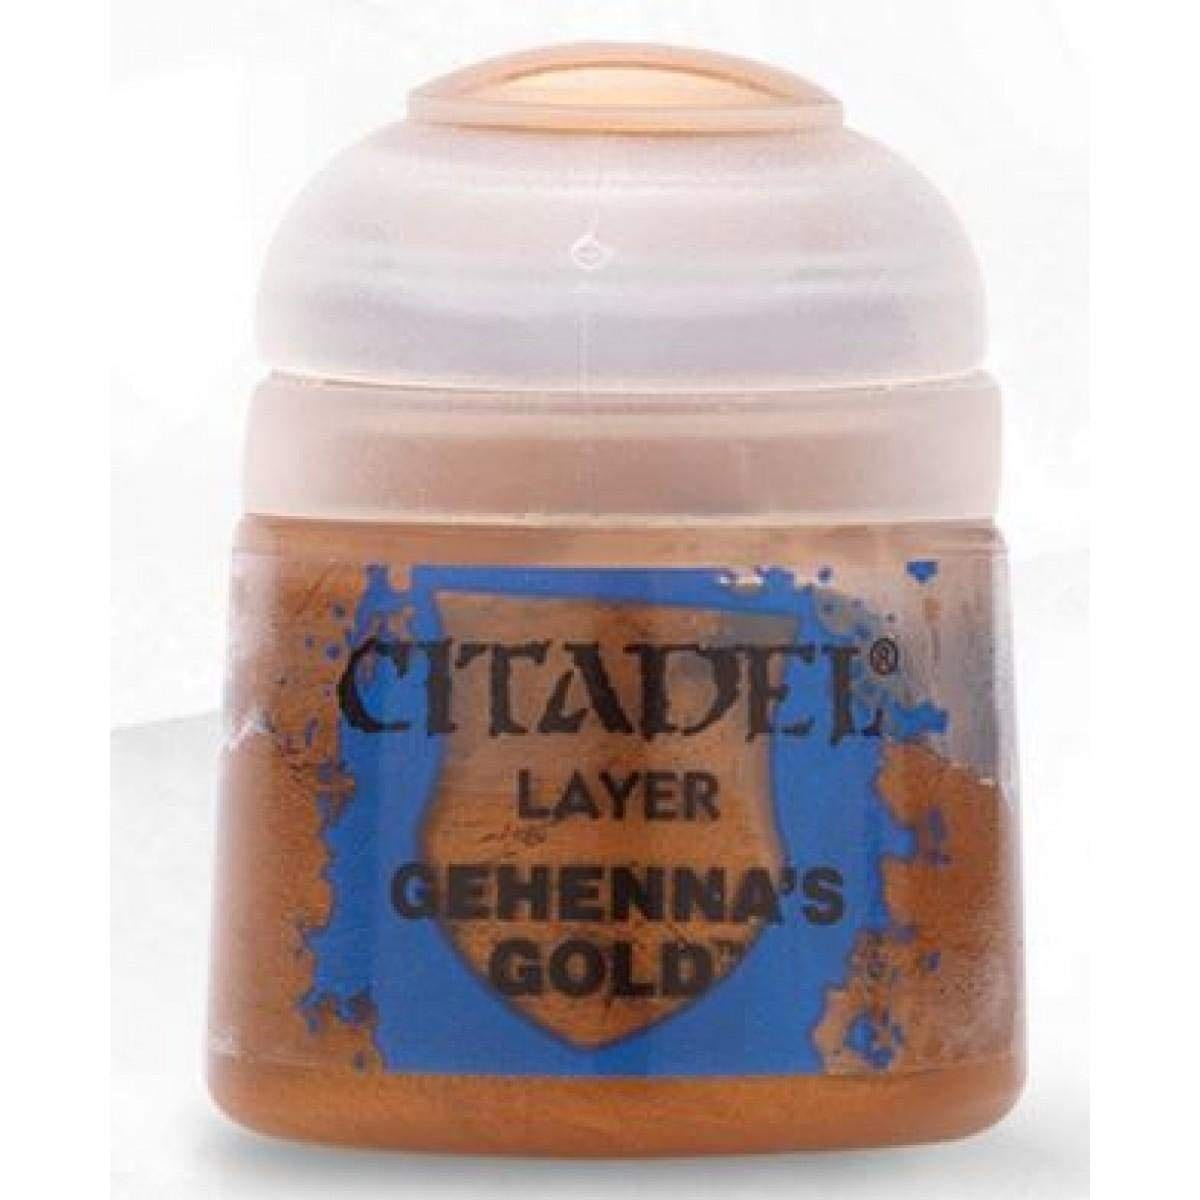 Games Workshop Citadel Paint: Layer - Gehennas Gold - Lost City Toys